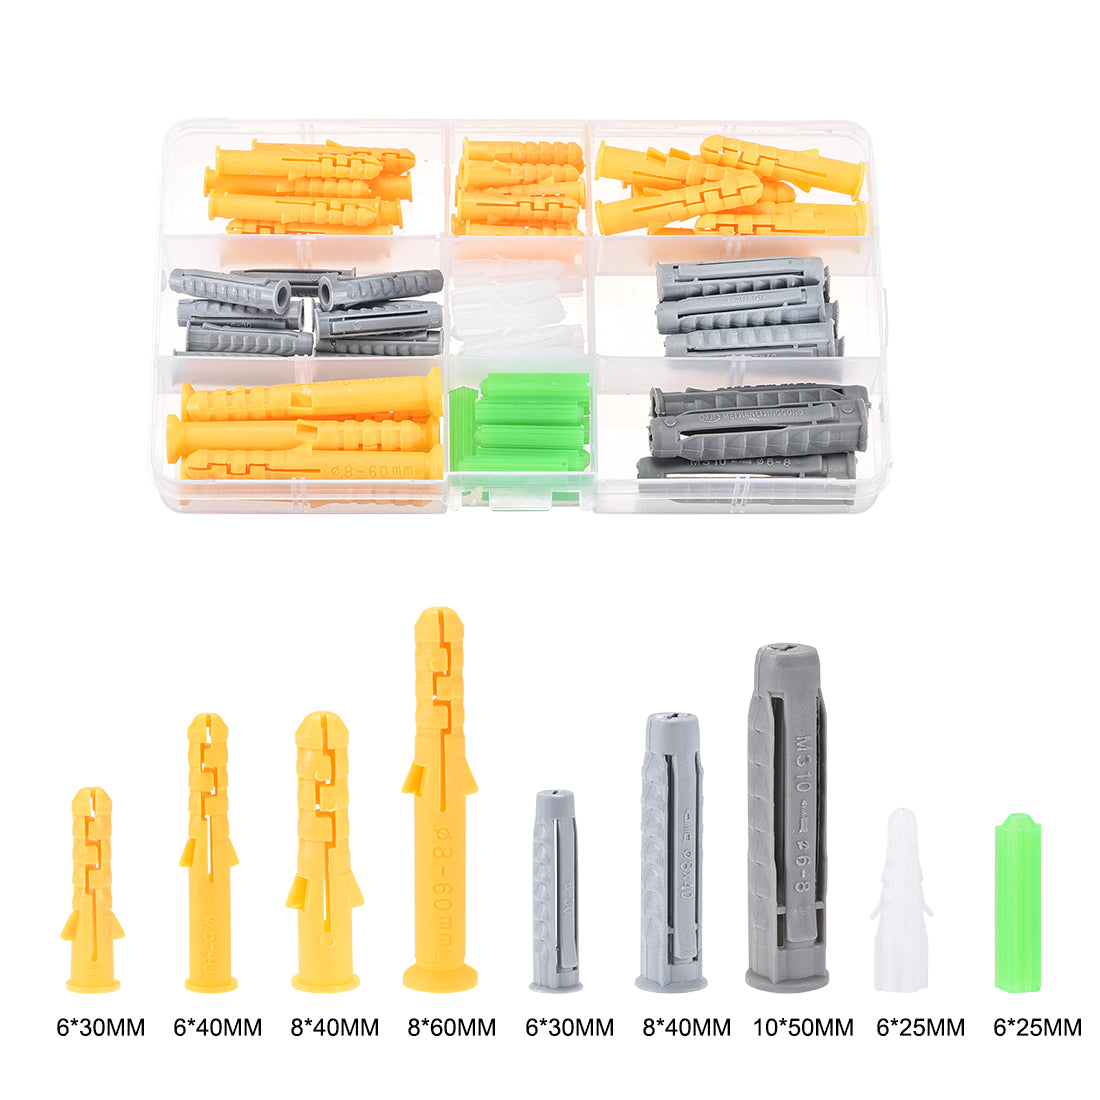 uxcell Uxcell Plastic Expansion Tube Assortment Kit for Drywall 4 Colors 73pcs